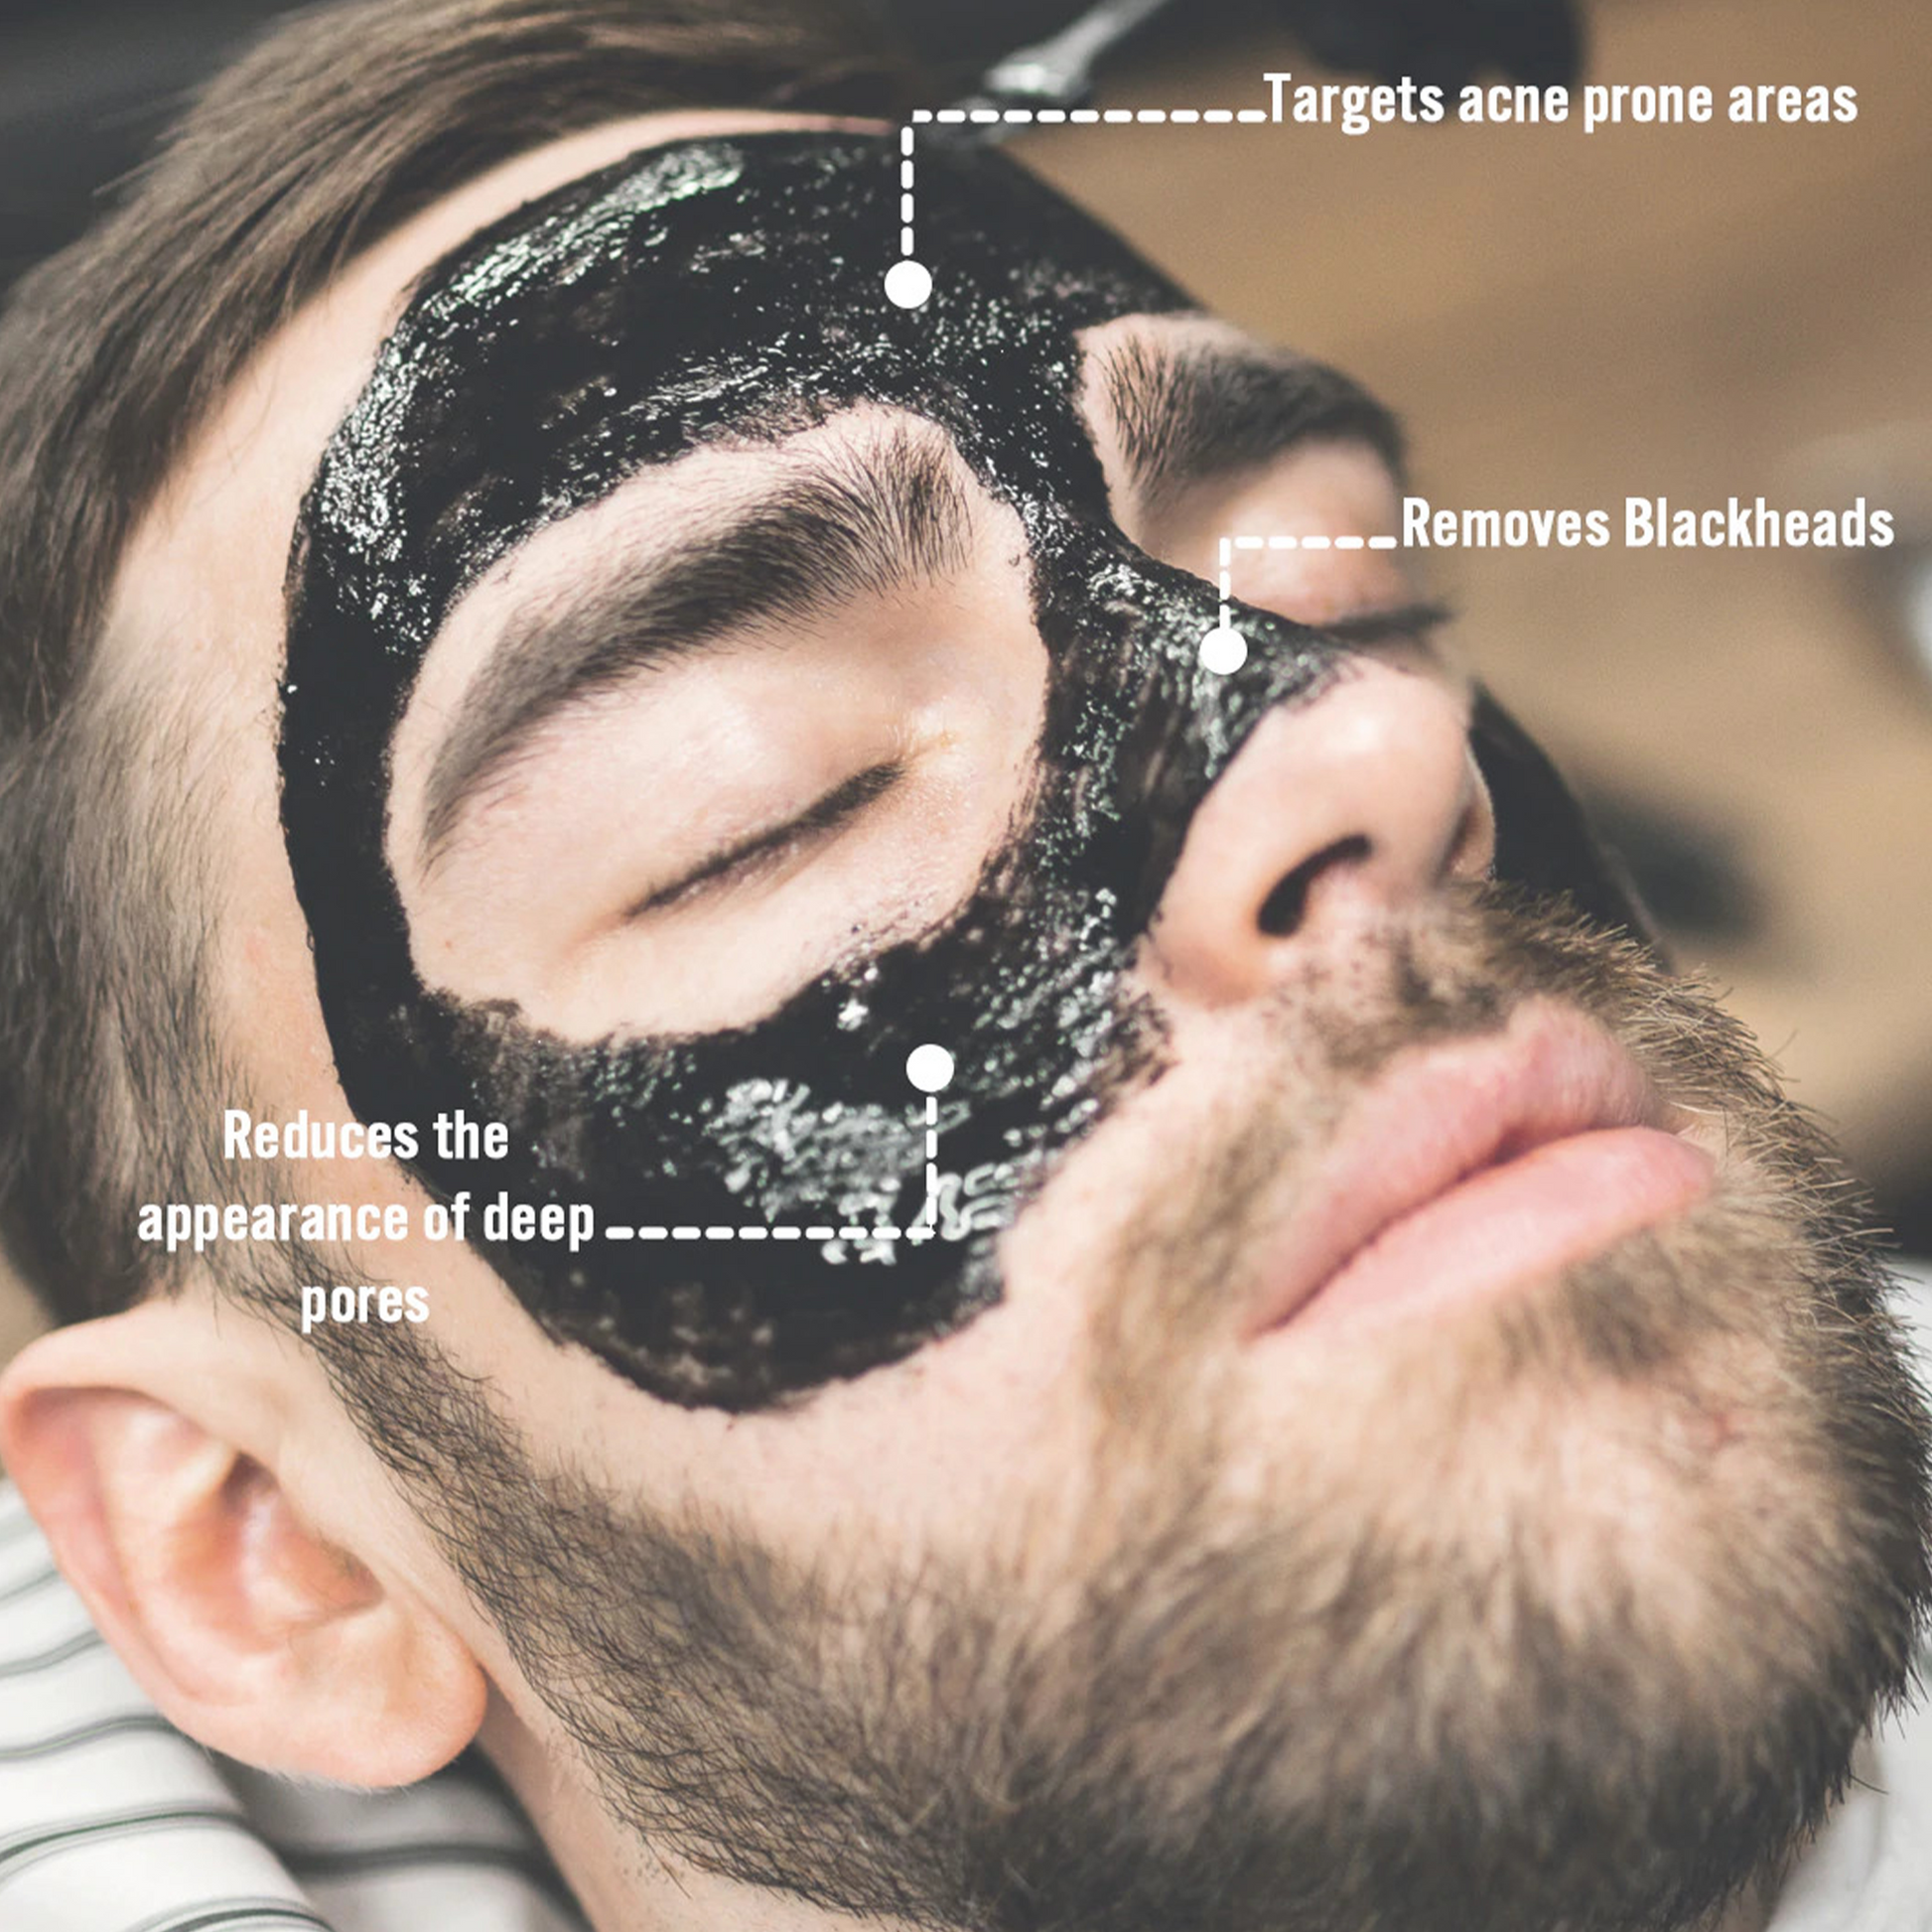 Barber Pro Face Putty Mask: The BARBER PRO Face Putty Peel Off Mask uses activated charcoal to deeply cleanse and unclog your pores. Once detoxified, it will also work to replenish and rebalance your skin leading to a glowing and healthy complexion.  The BARBER PRO Face Putty Peel Off Mask is the ultimate choice to ensure your skin is healthy and purified. The Peel Off factor will allow you to target blackheads and acne, reaching deep into the pores and detoxifying your skin well below the surface.